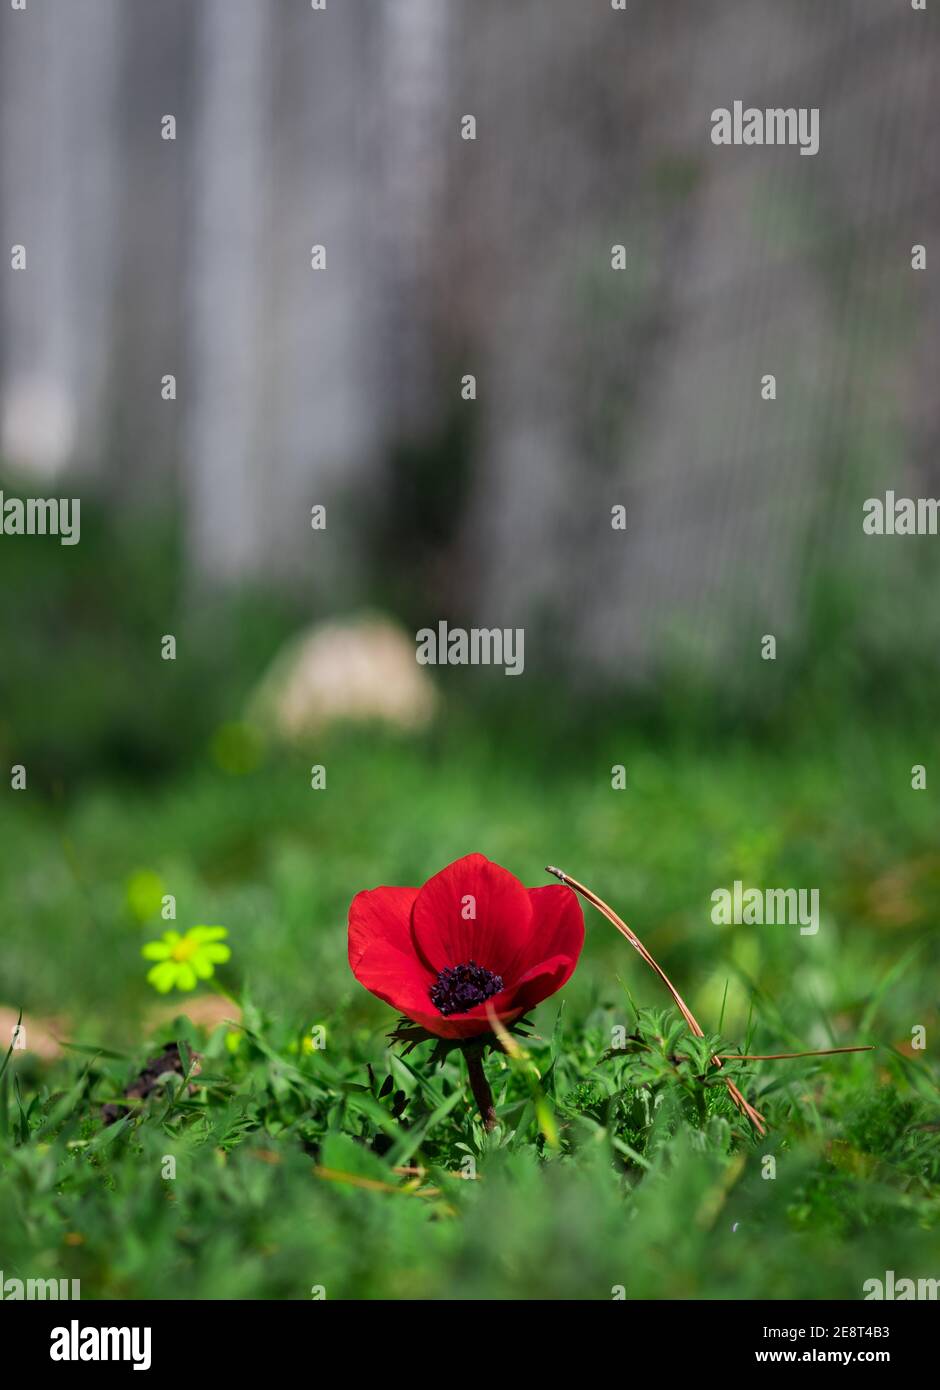 Red anemone flower in a green grass, blurred background Stock Photo